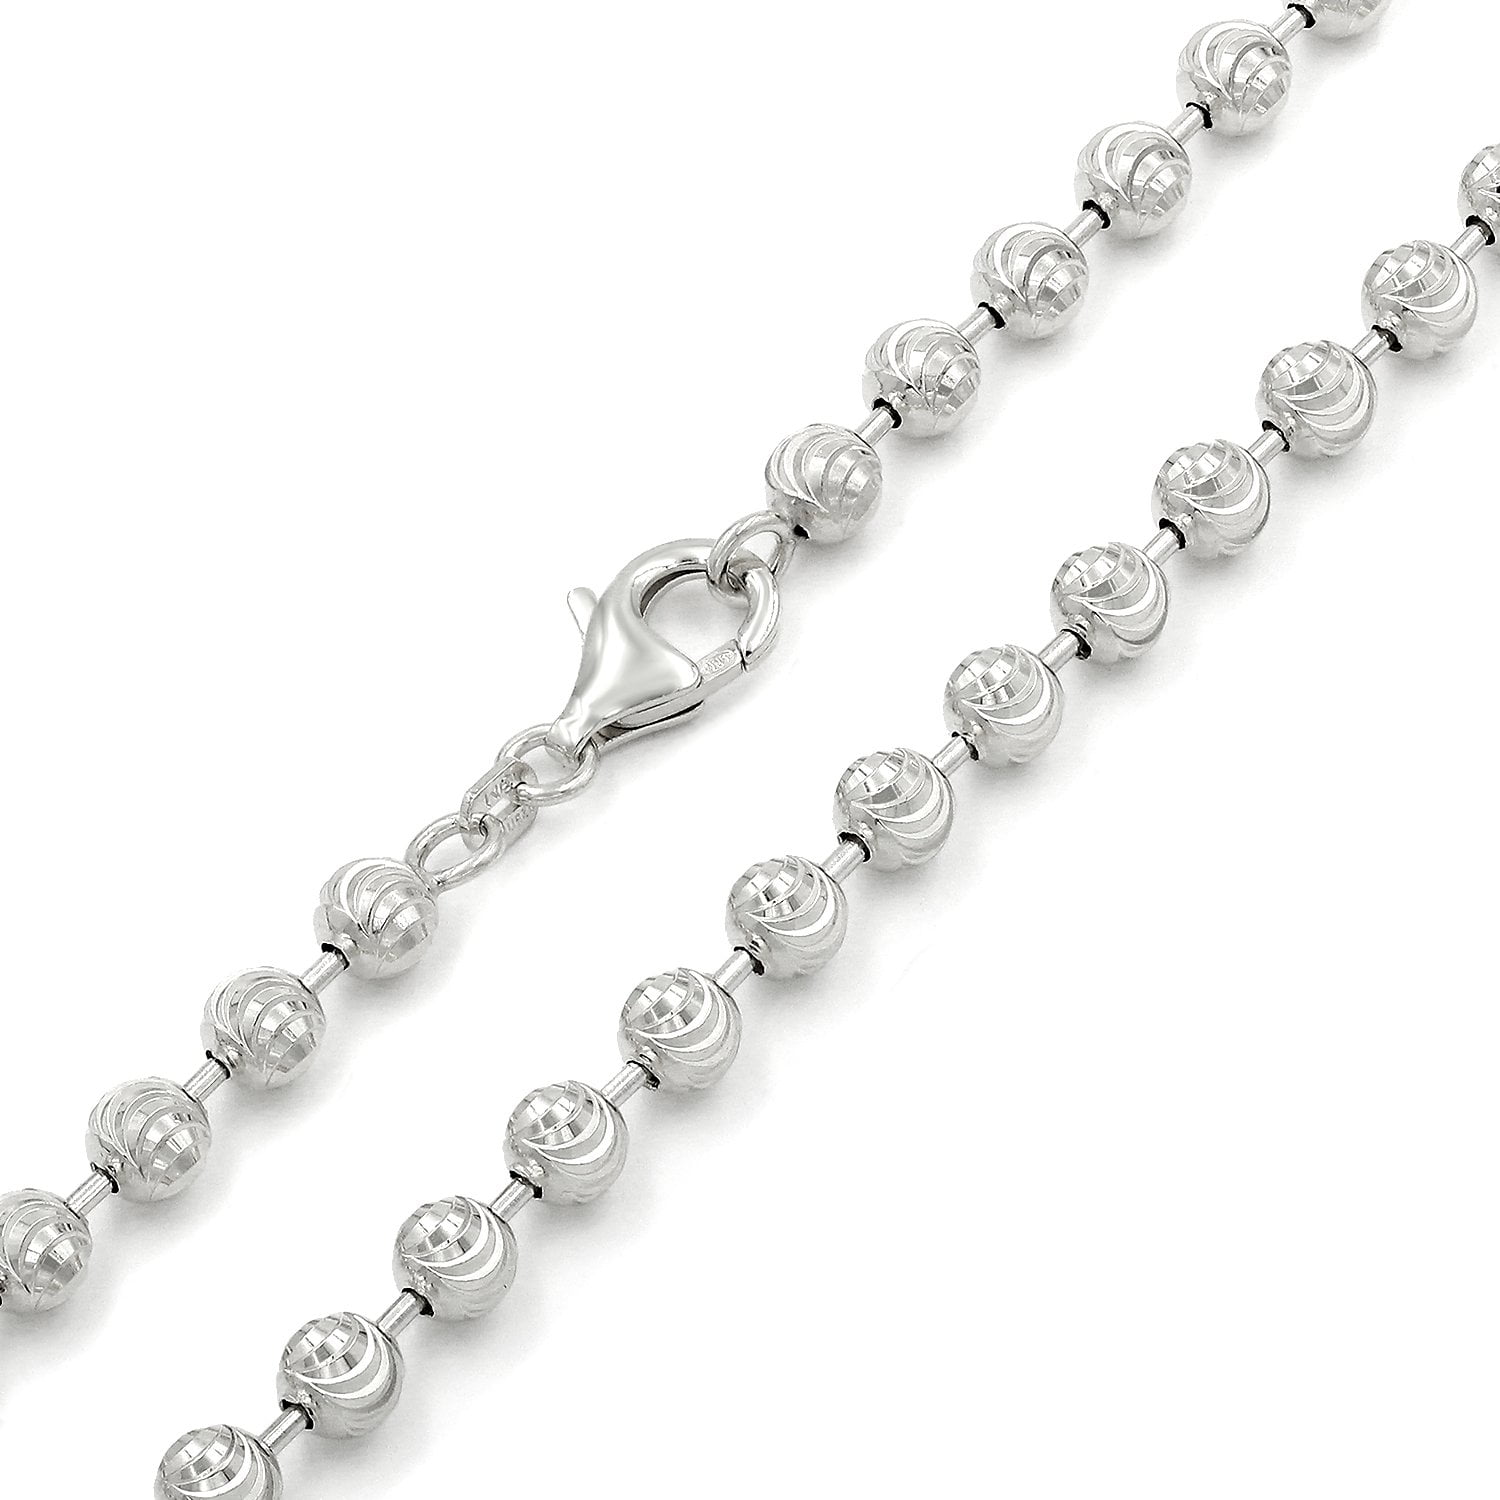 5mm 14k Gold Wrapped 925 Silver Moon Cut Bead Chain Necklace 